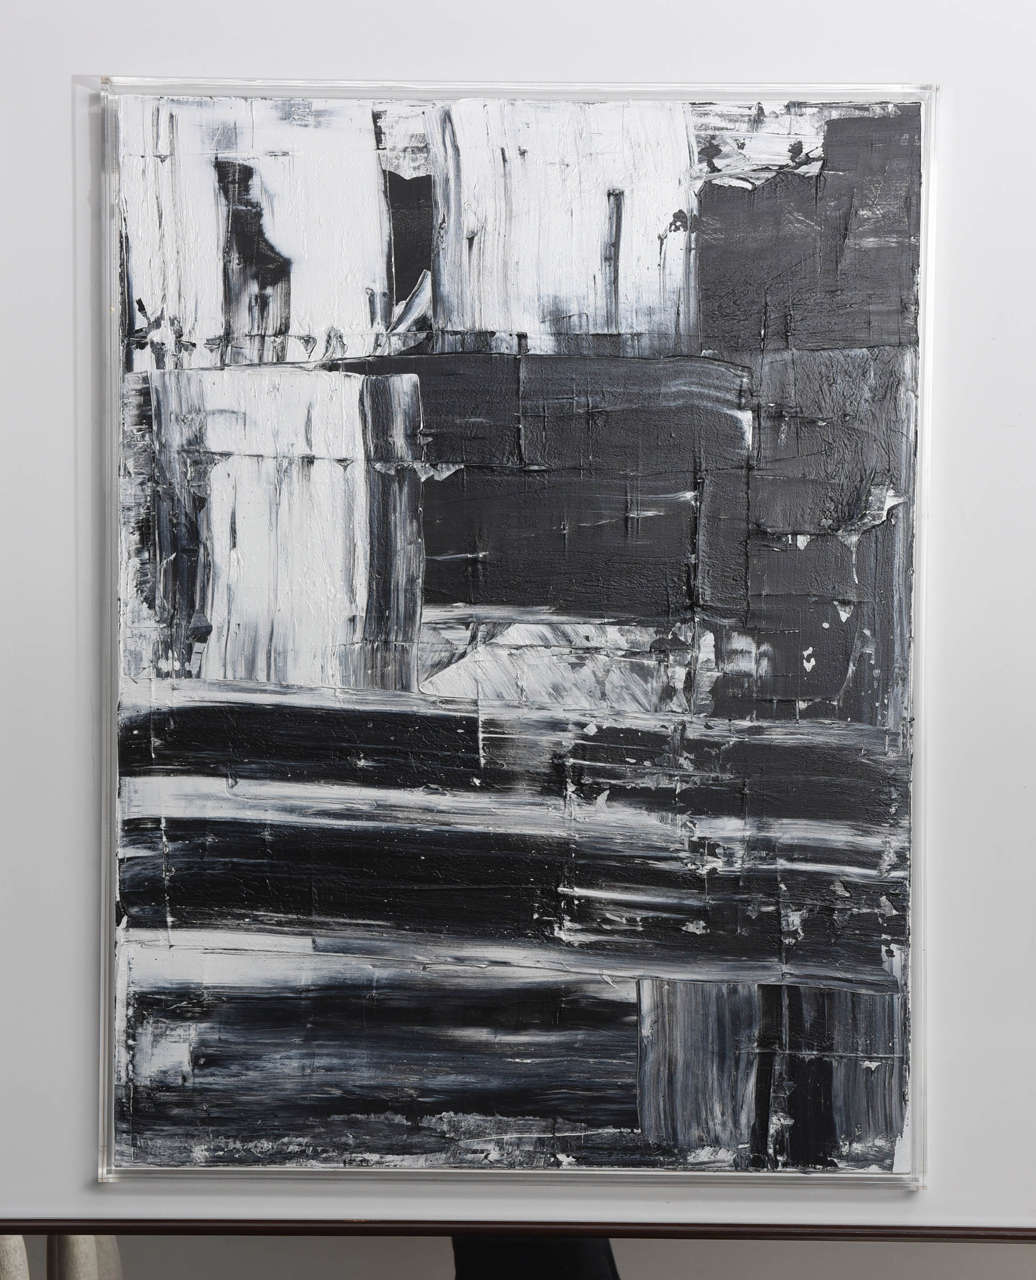 Abstract original oil on canvas.
New series, black and white, 11 painting in total.